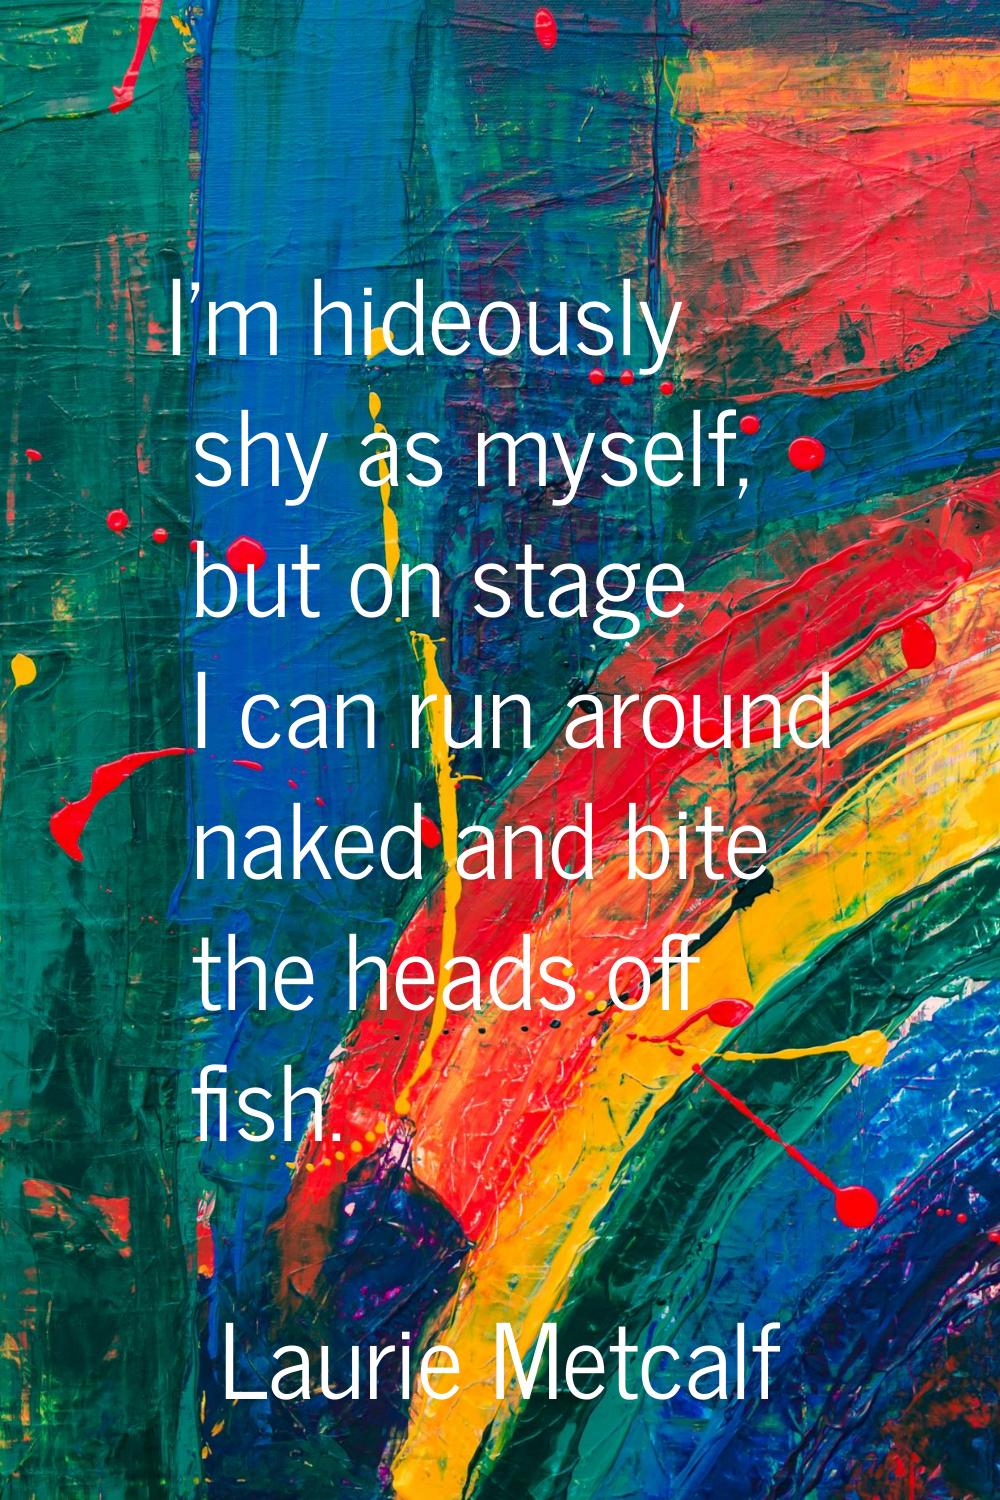 I'm hideously shy as myself, but on stage I can run around naked and bite the heads off fish.